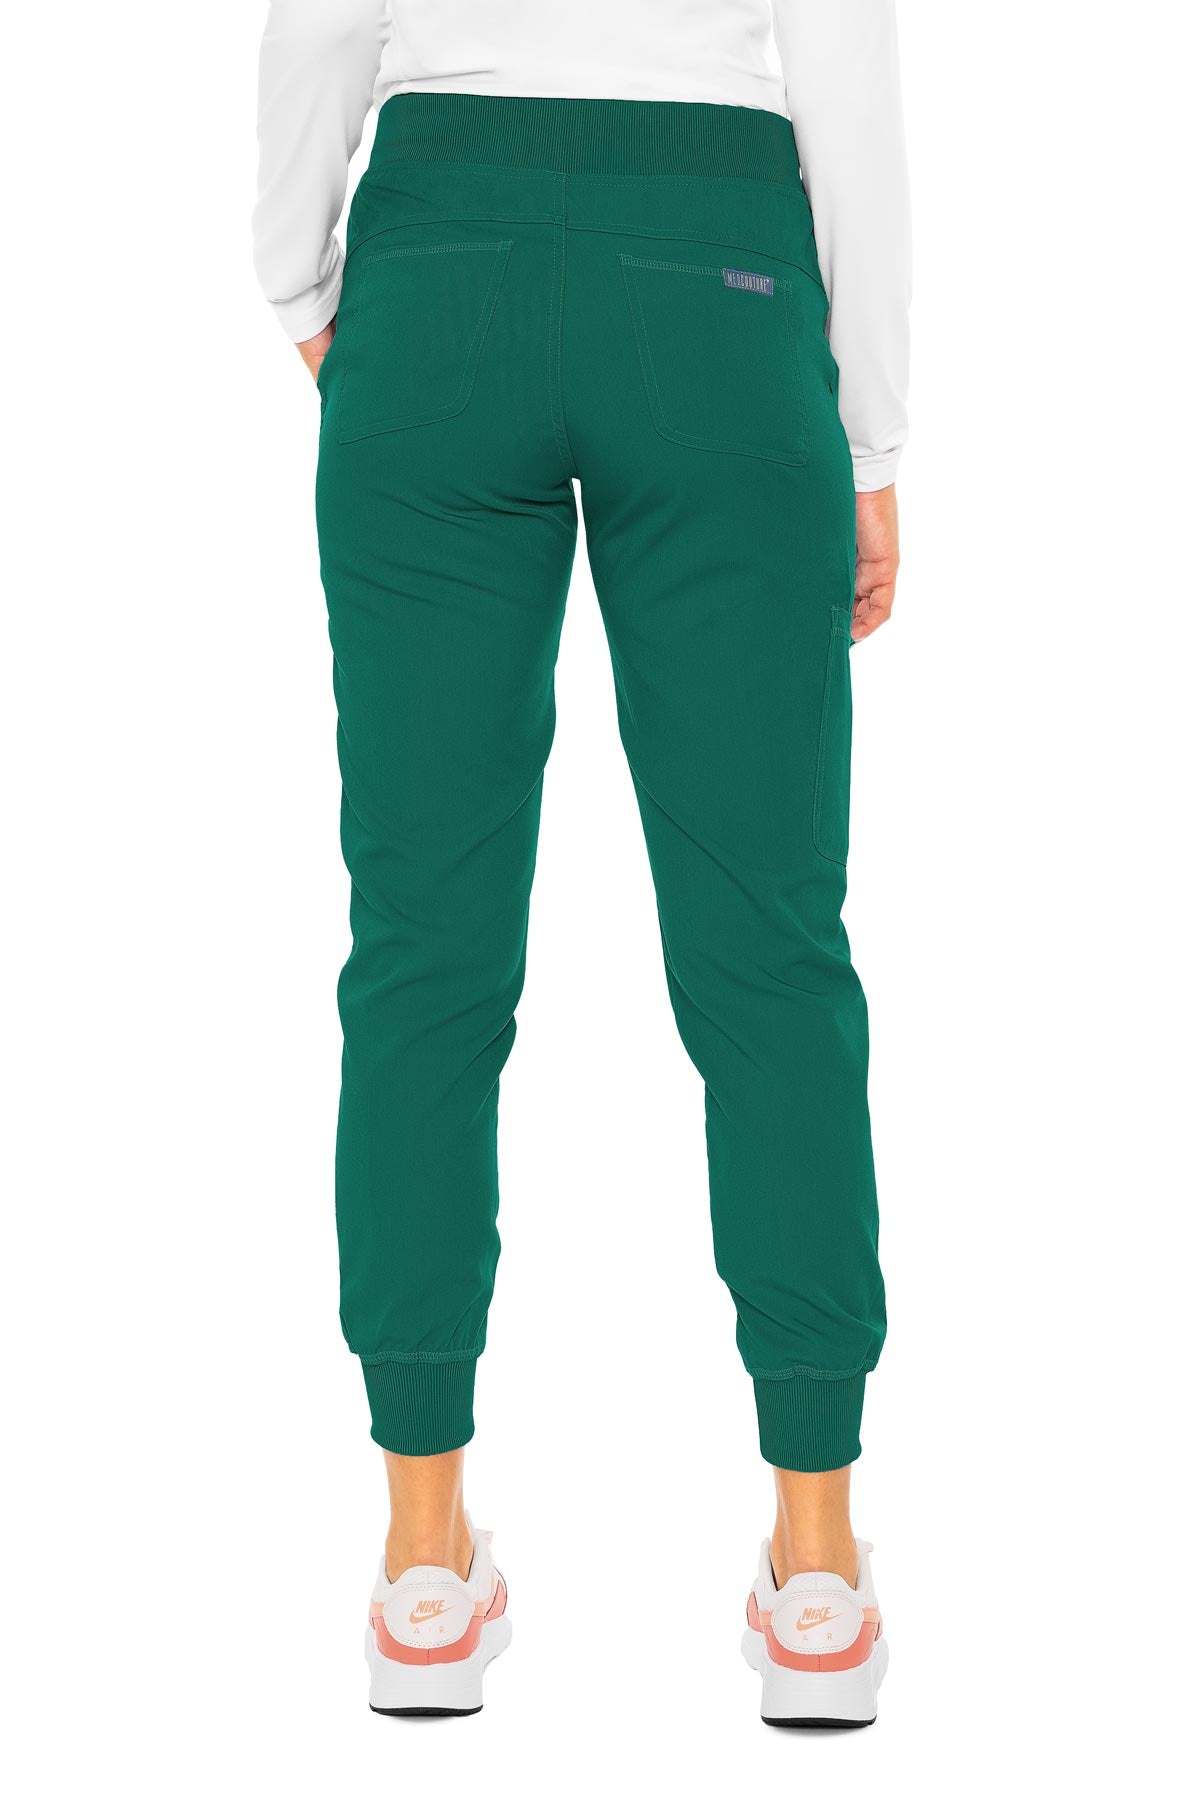 Med Couture Peaches 8721 Seamed Jogger Scrub Pant – Valley West